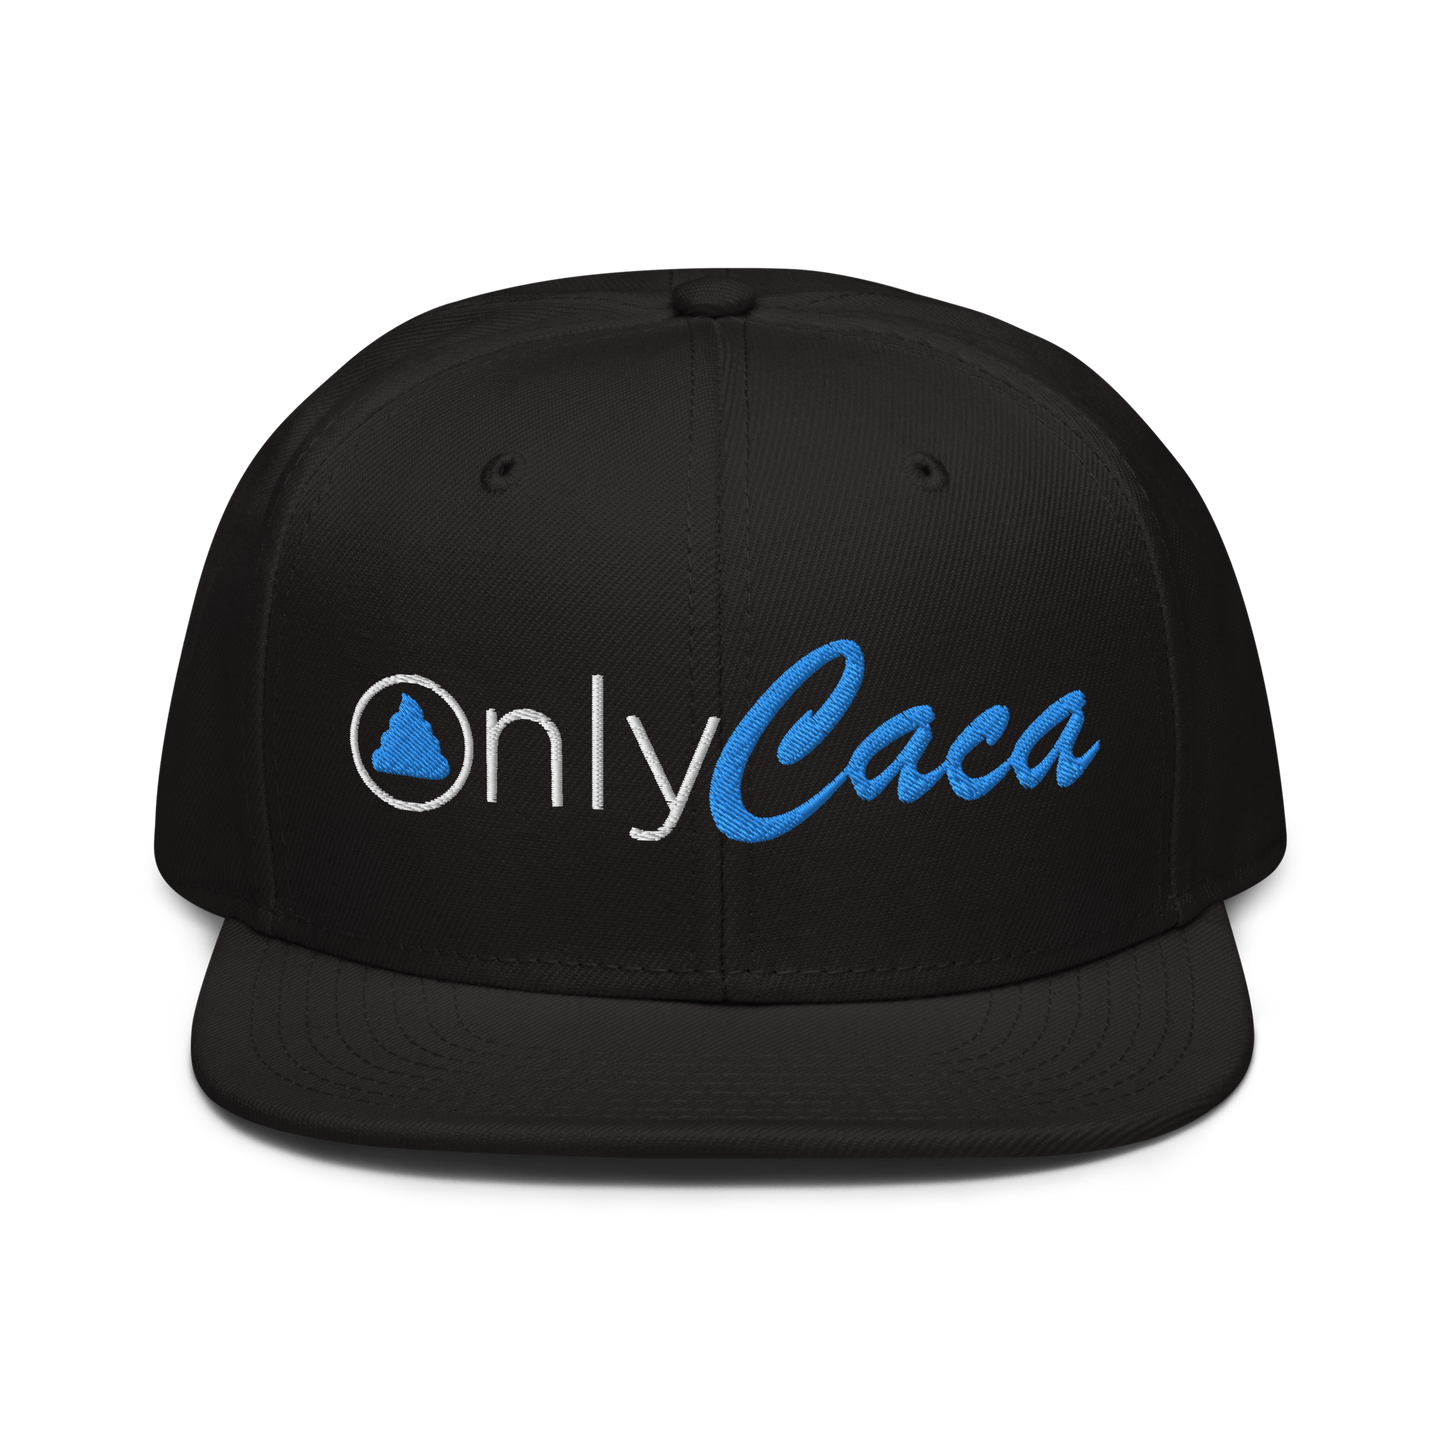 Only Caca Snapback Hat